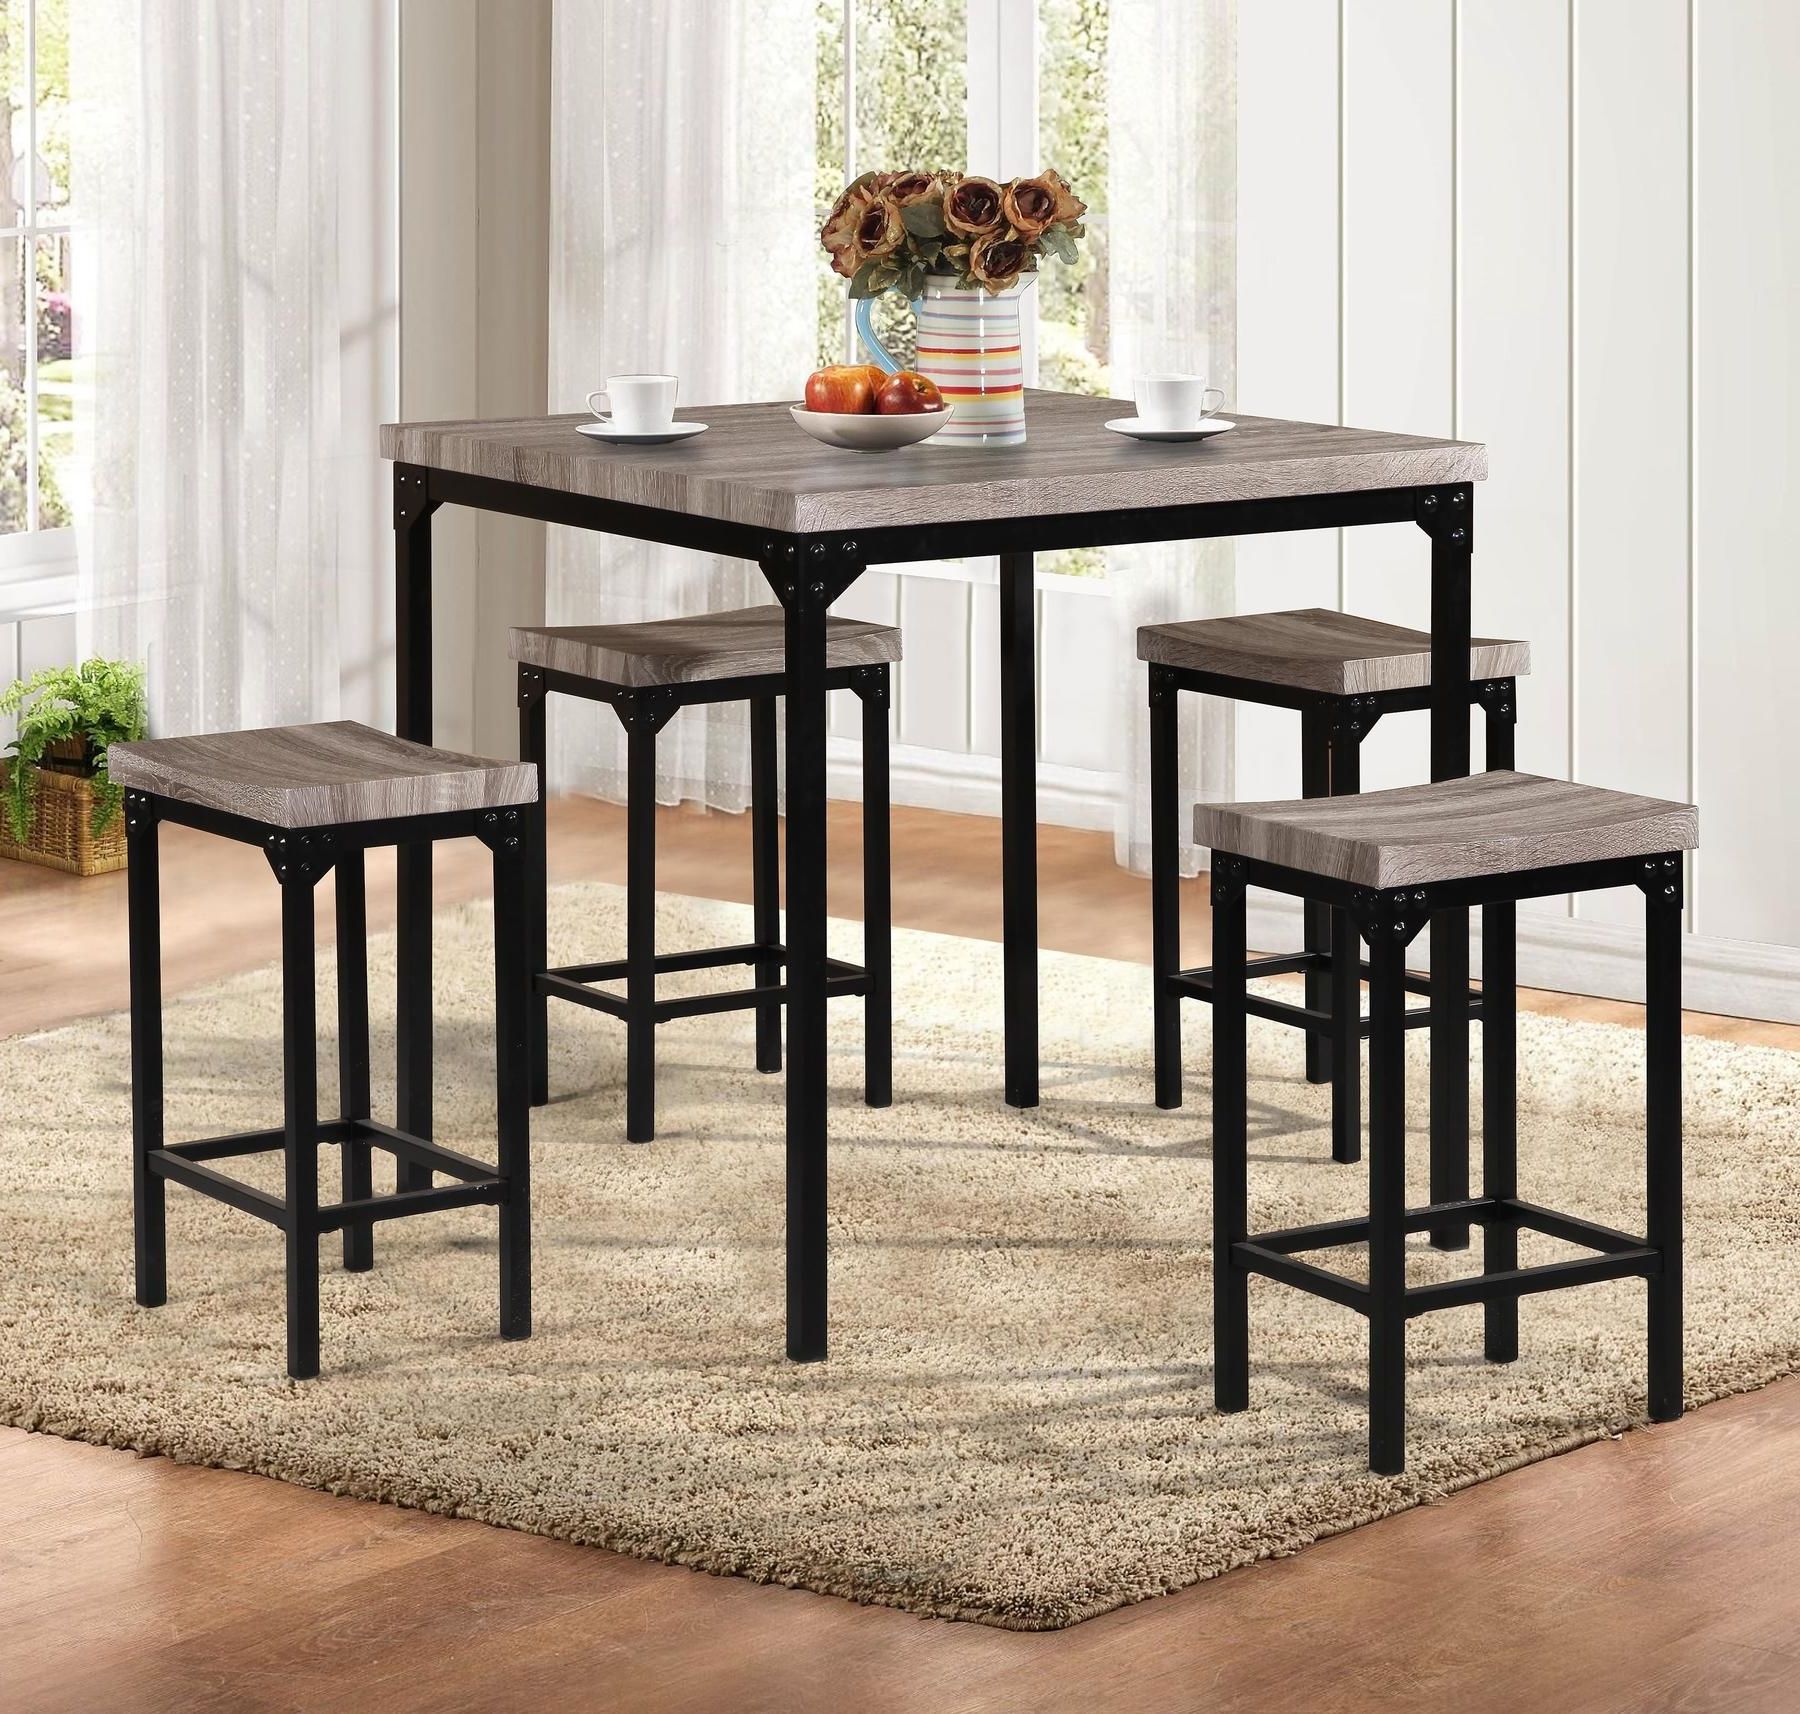 Poundex P2141 Casual Counter Height 5pcs Dining Set Intended For 2019 Andrelle Bar Height Pedestal Dining Tables (View 18 of 20)